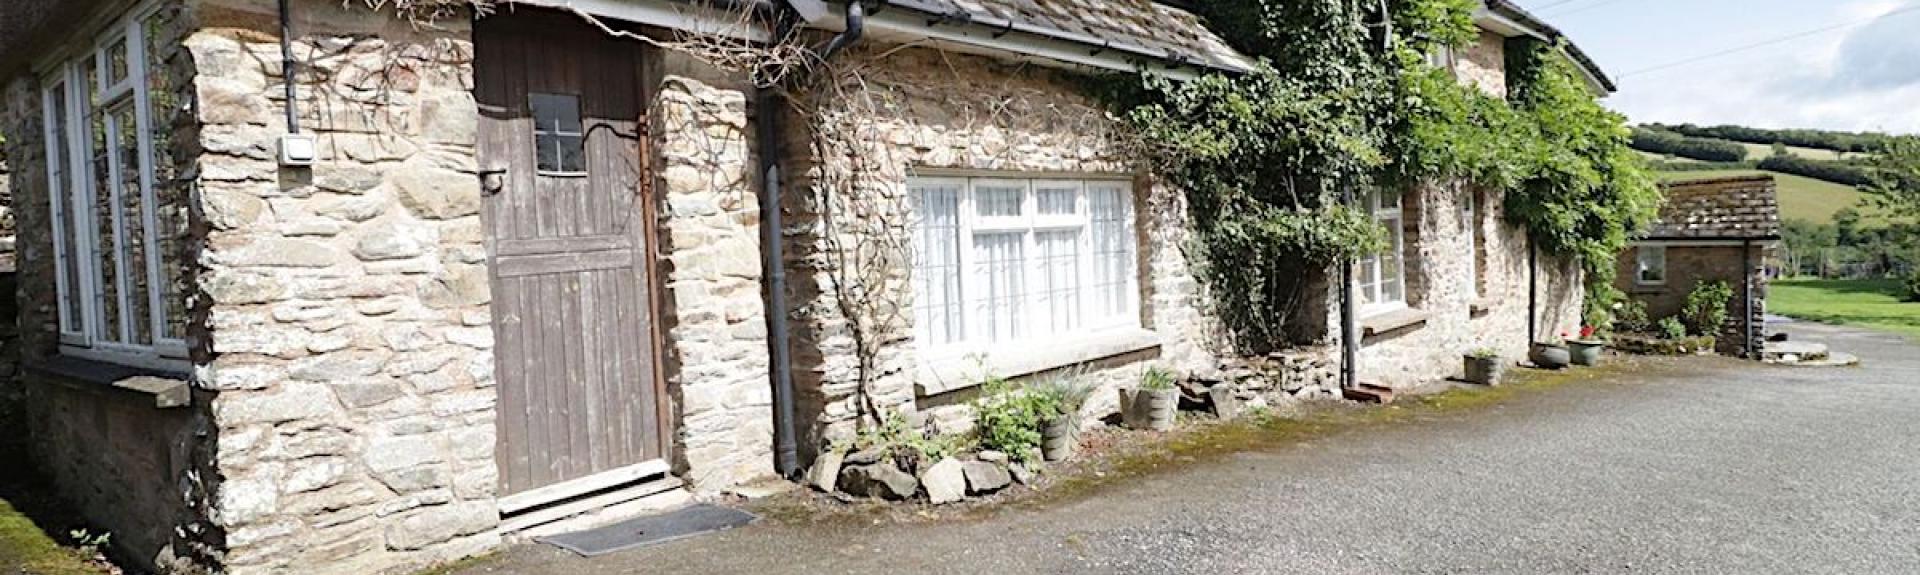 A wisteria-clad, stone-built Exmoor farm cottage surrounded by countryside.